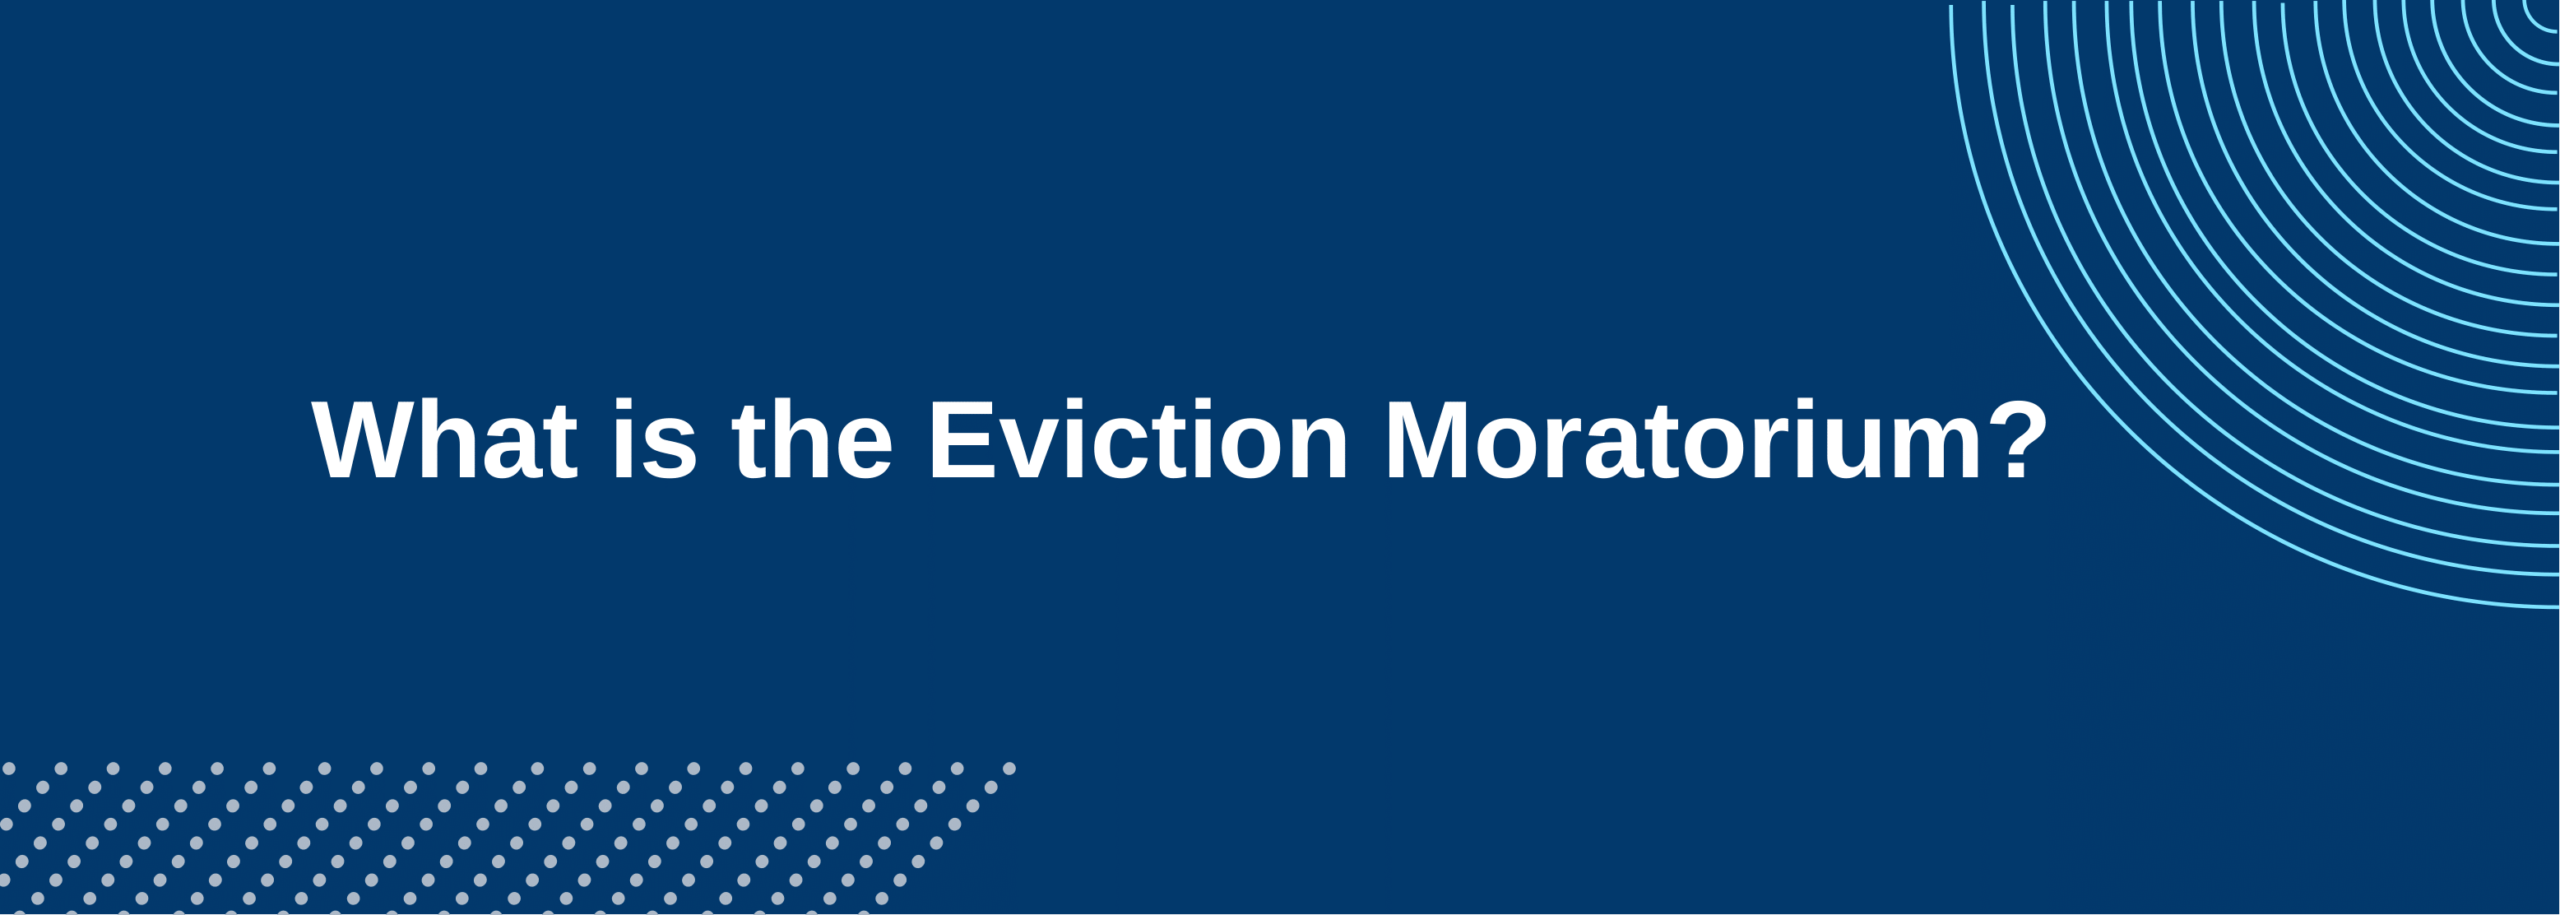 The federal eviction moratorium began on March 25, 2020, when Congress passed the CARES Act.